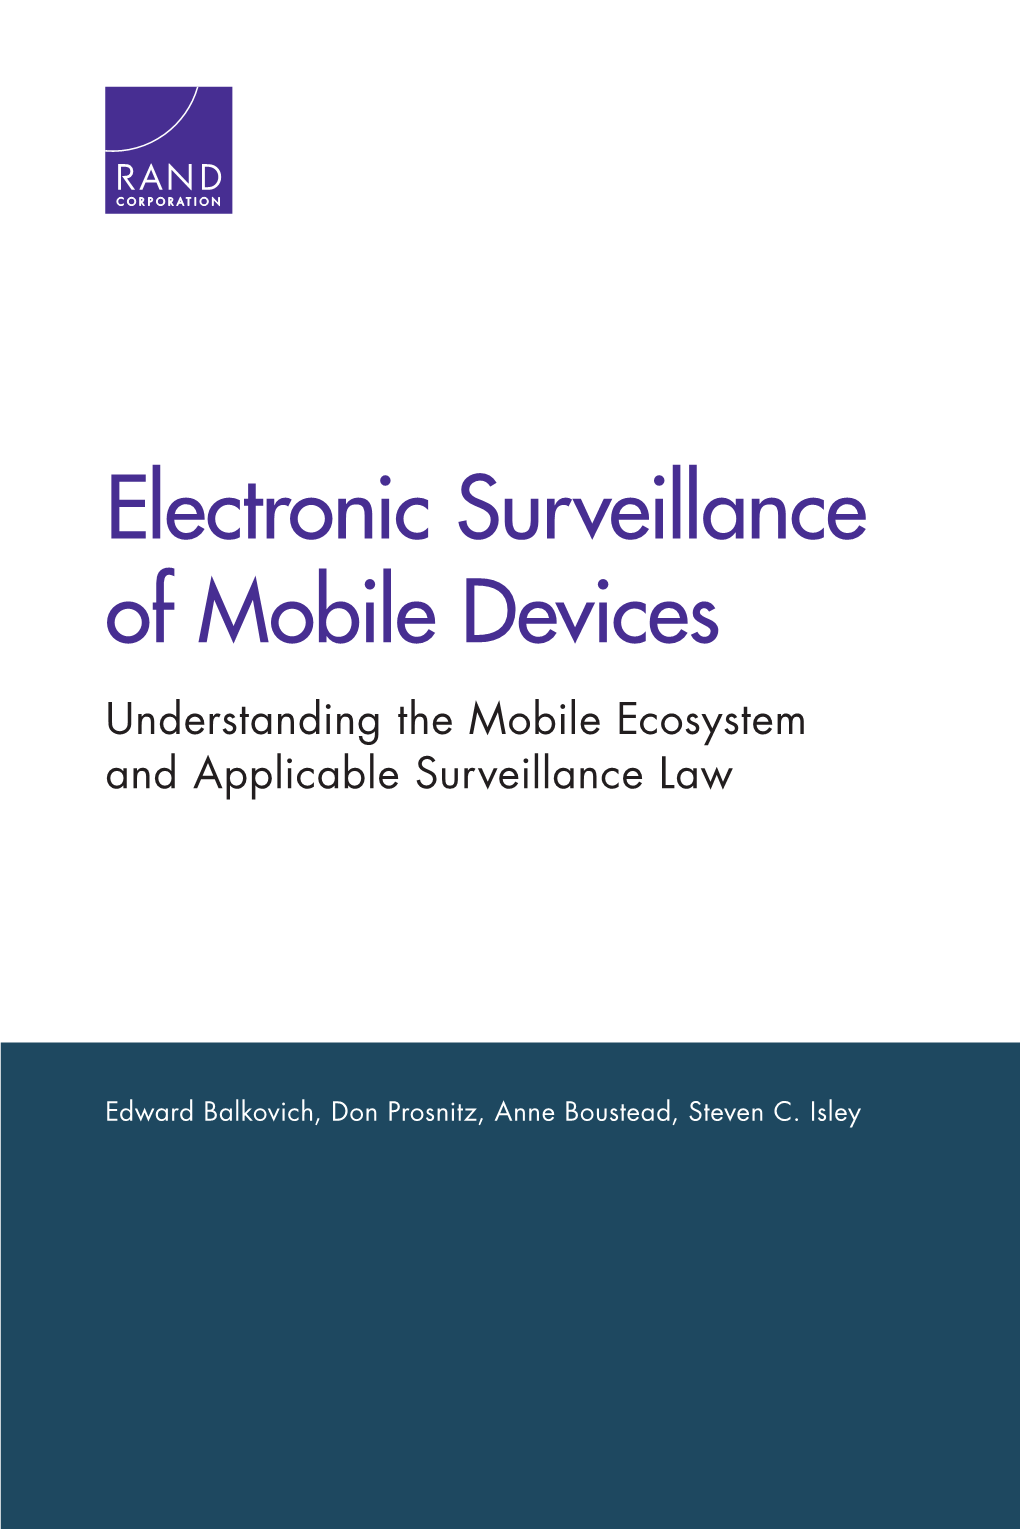 Understanding the Mobile Ecosystem and Applicable Surveillance Law